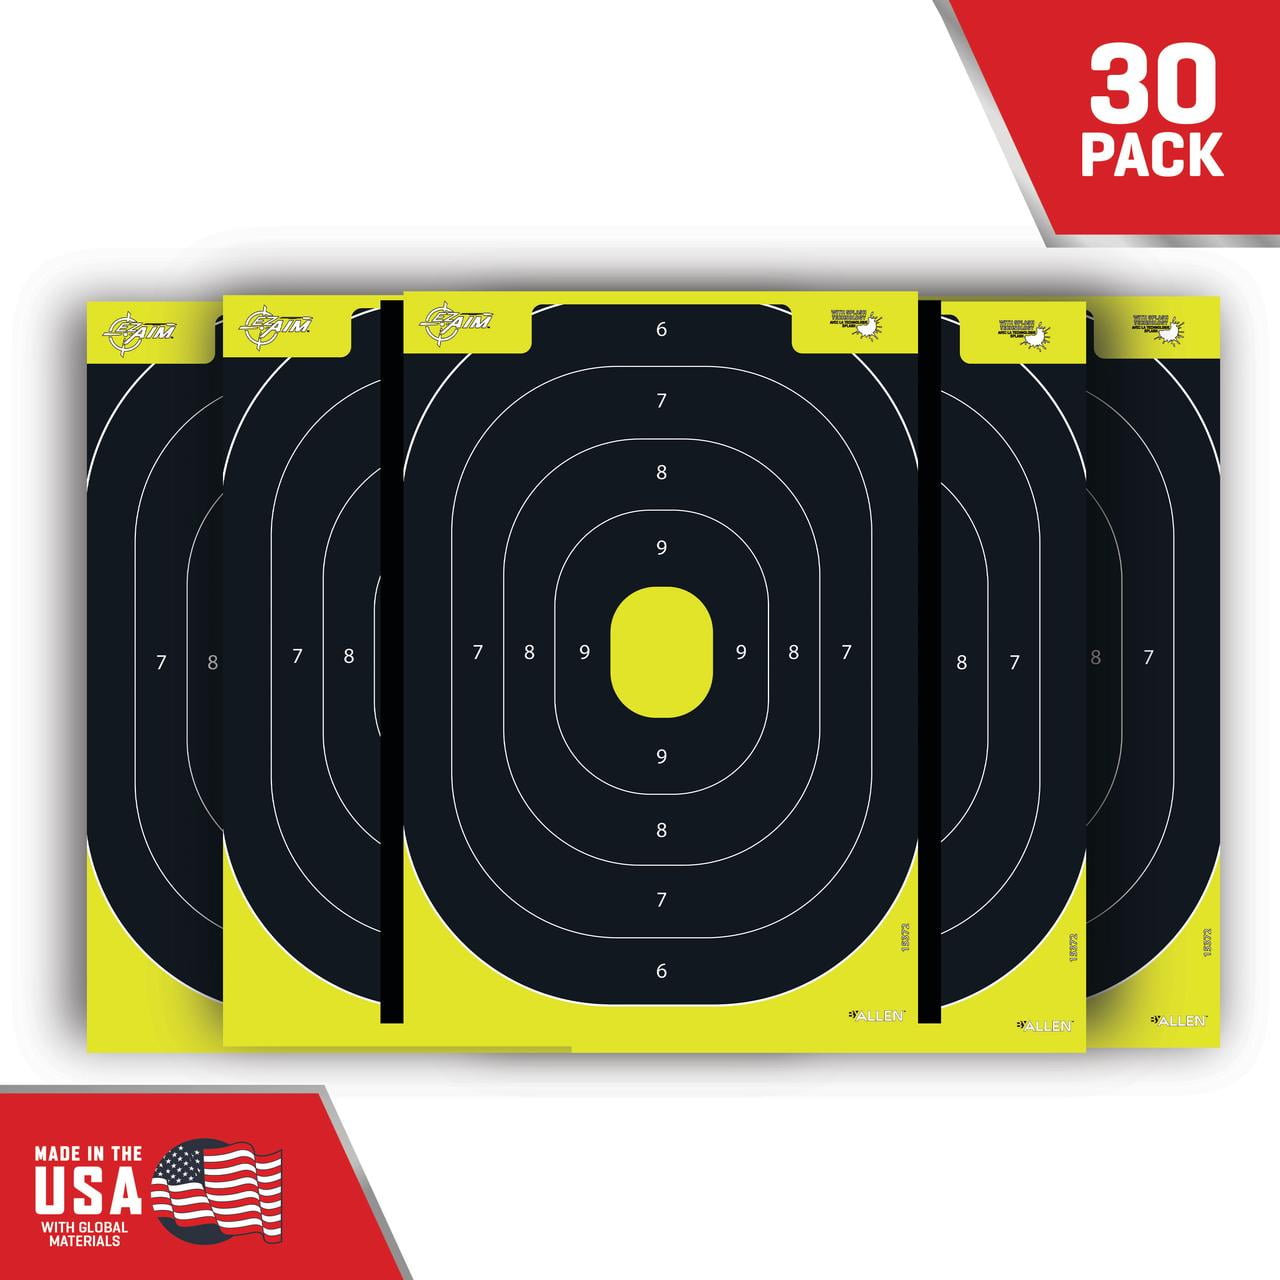 Details about   3 Packs Spinner Target Shooting Target Wall Tree Stick for Shooting Practice 